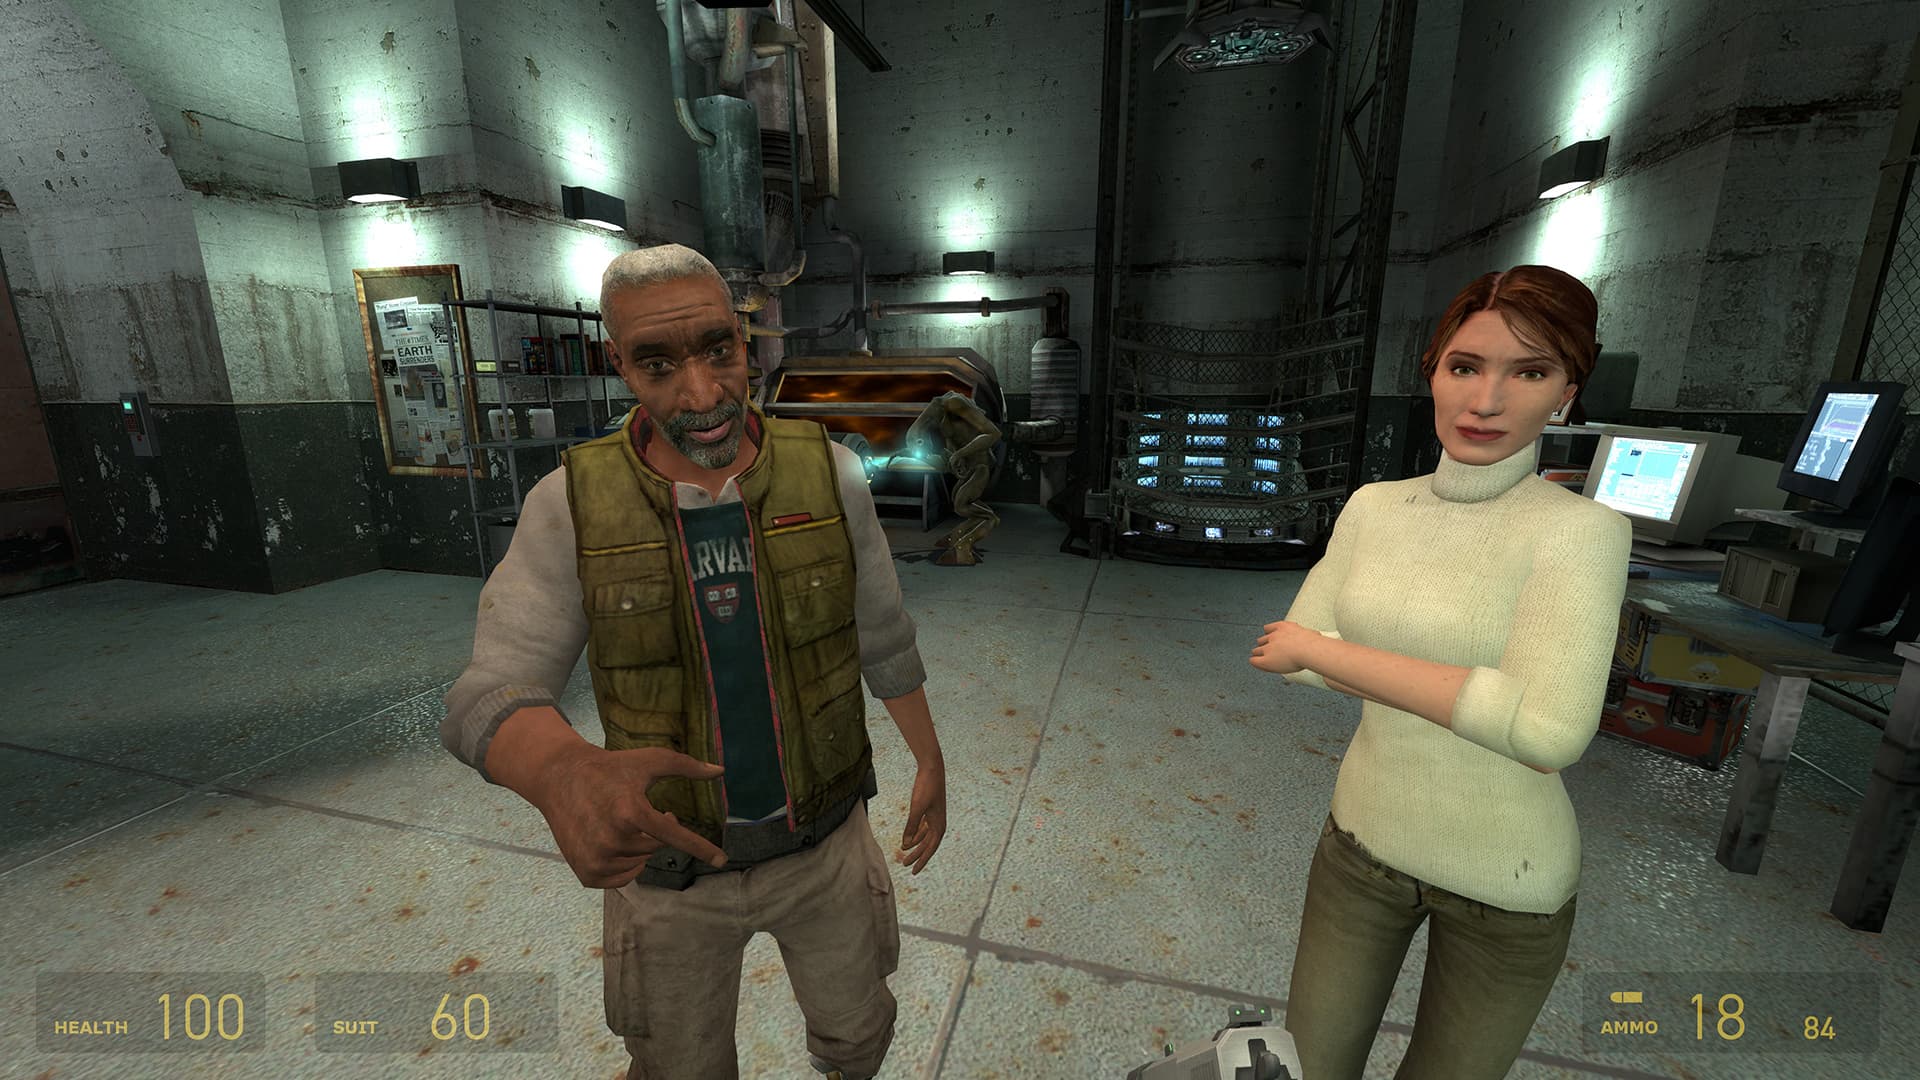 A screenshot from Half-Life 2. Doctors Eli Vance and Judith Mossman talk with the player in the laboratory of Black Mesa East.